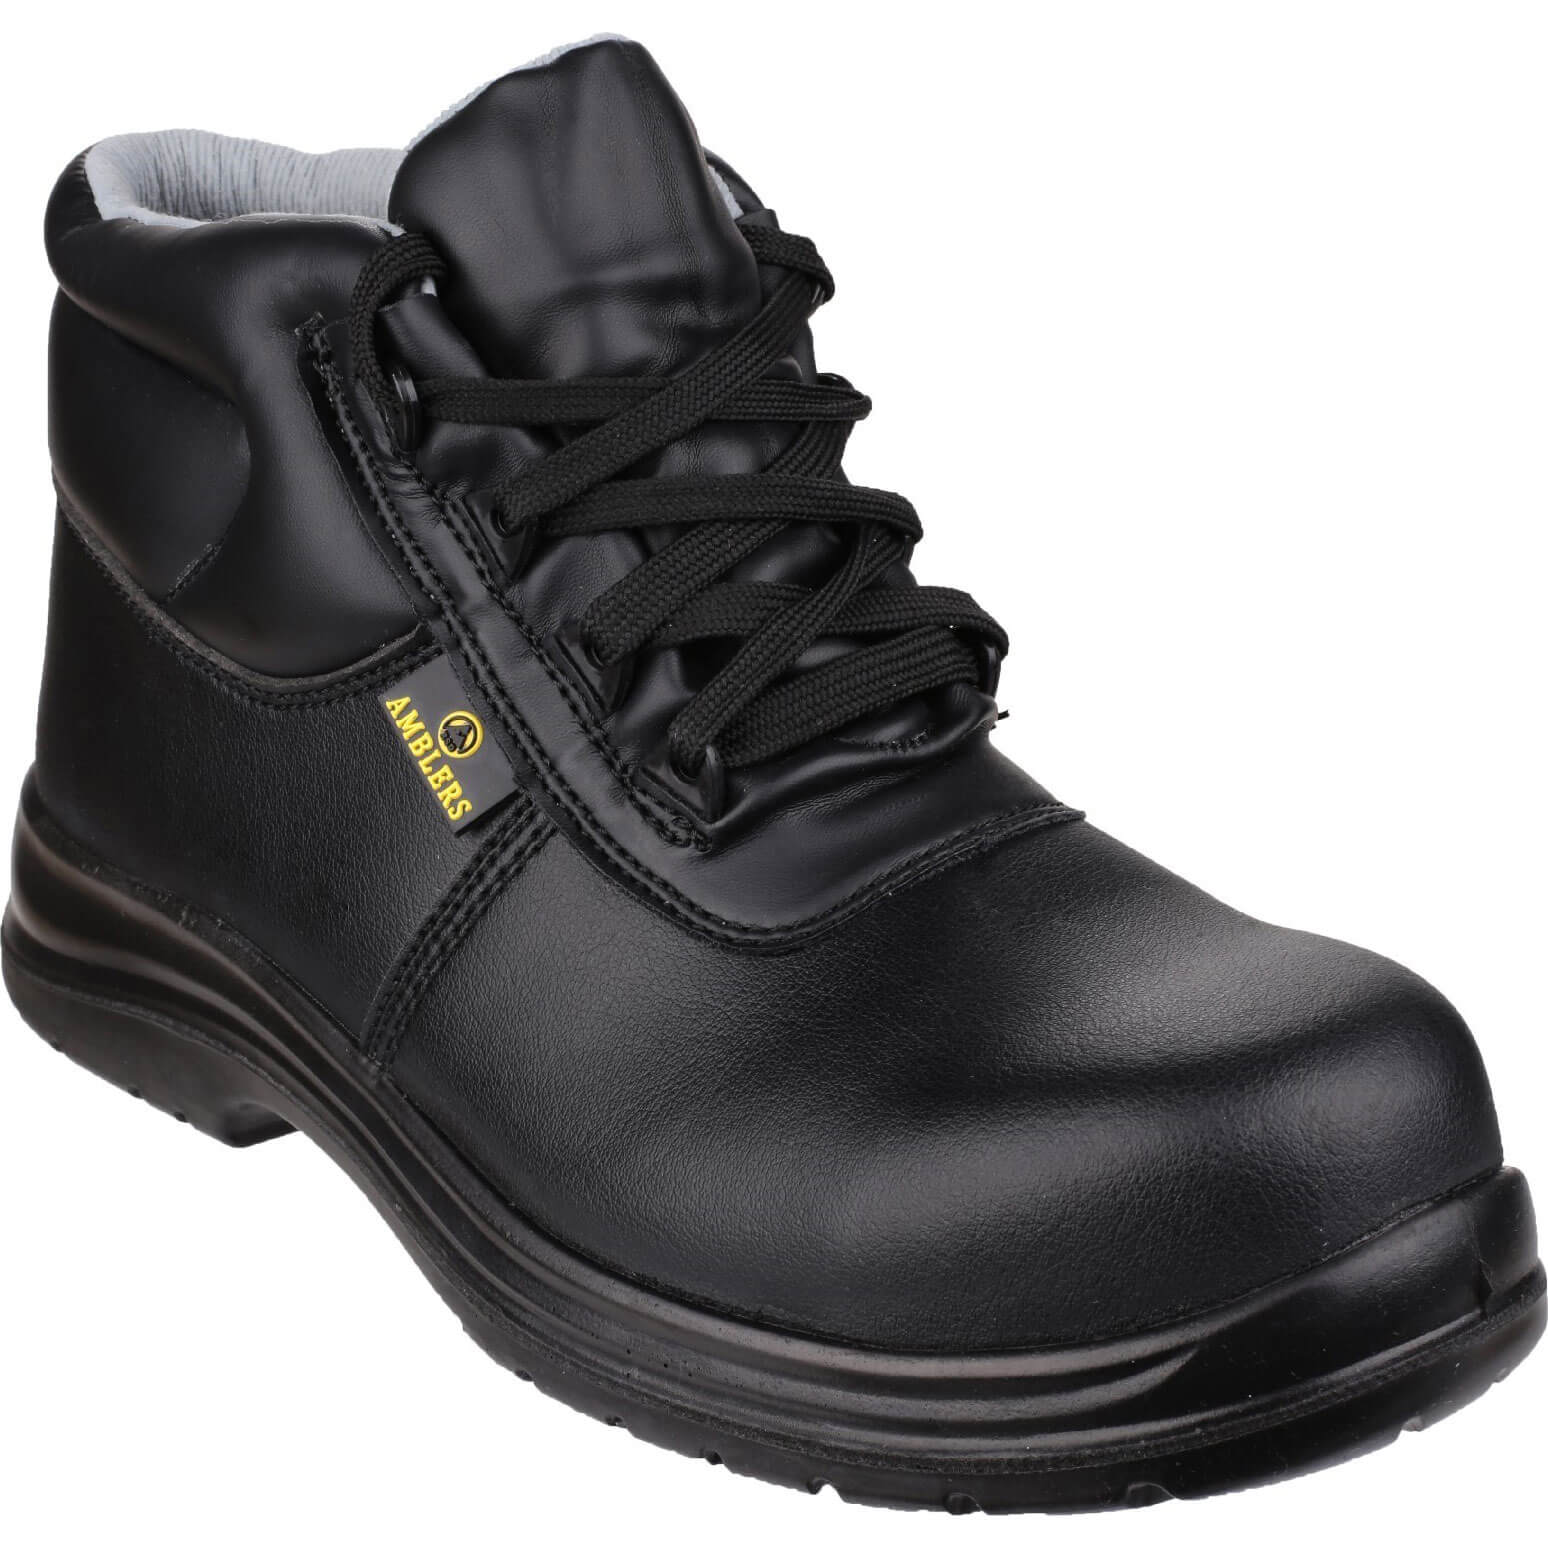 Photo of Amblers Mens Safety Fs663 Metal-free Water-resistant Safety Boots Black Size 11